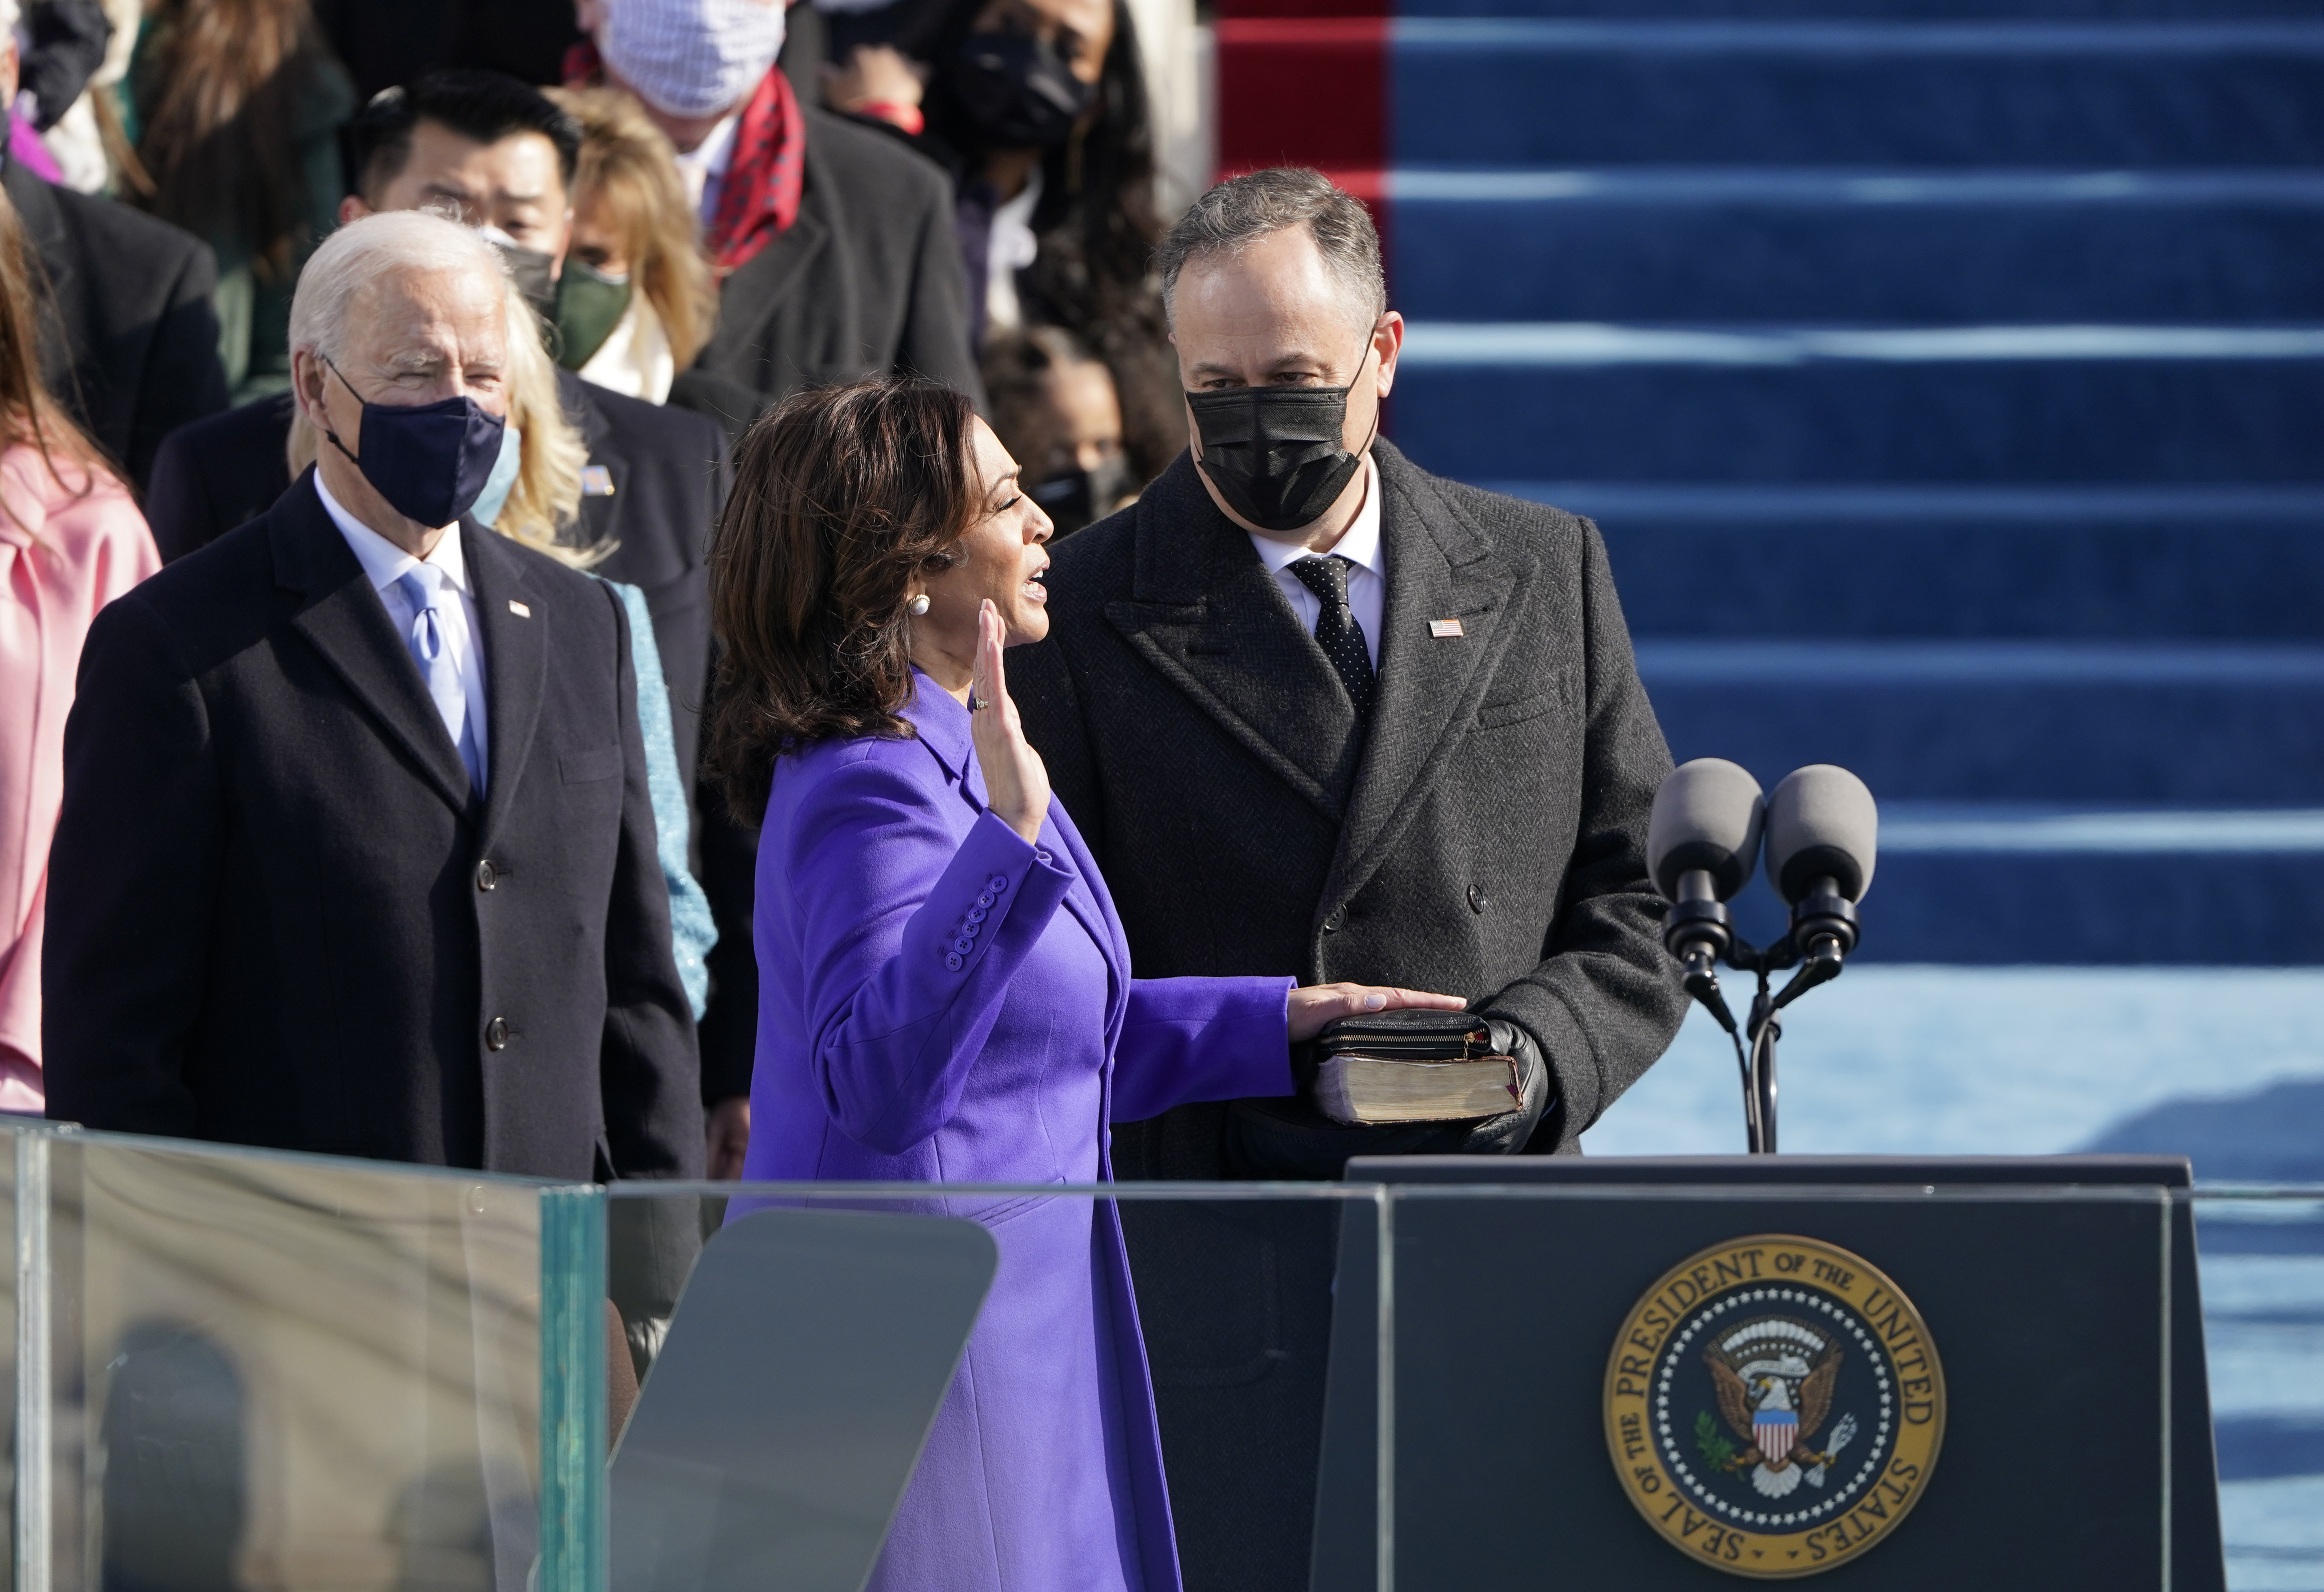 Kamala Harris is sworn in as vice president by Supreme Court Justice Sonia Sotomayor as her husband Doug Emhoff holds the Bible during the 59th presidential inauguration at the US Capitol in Washington